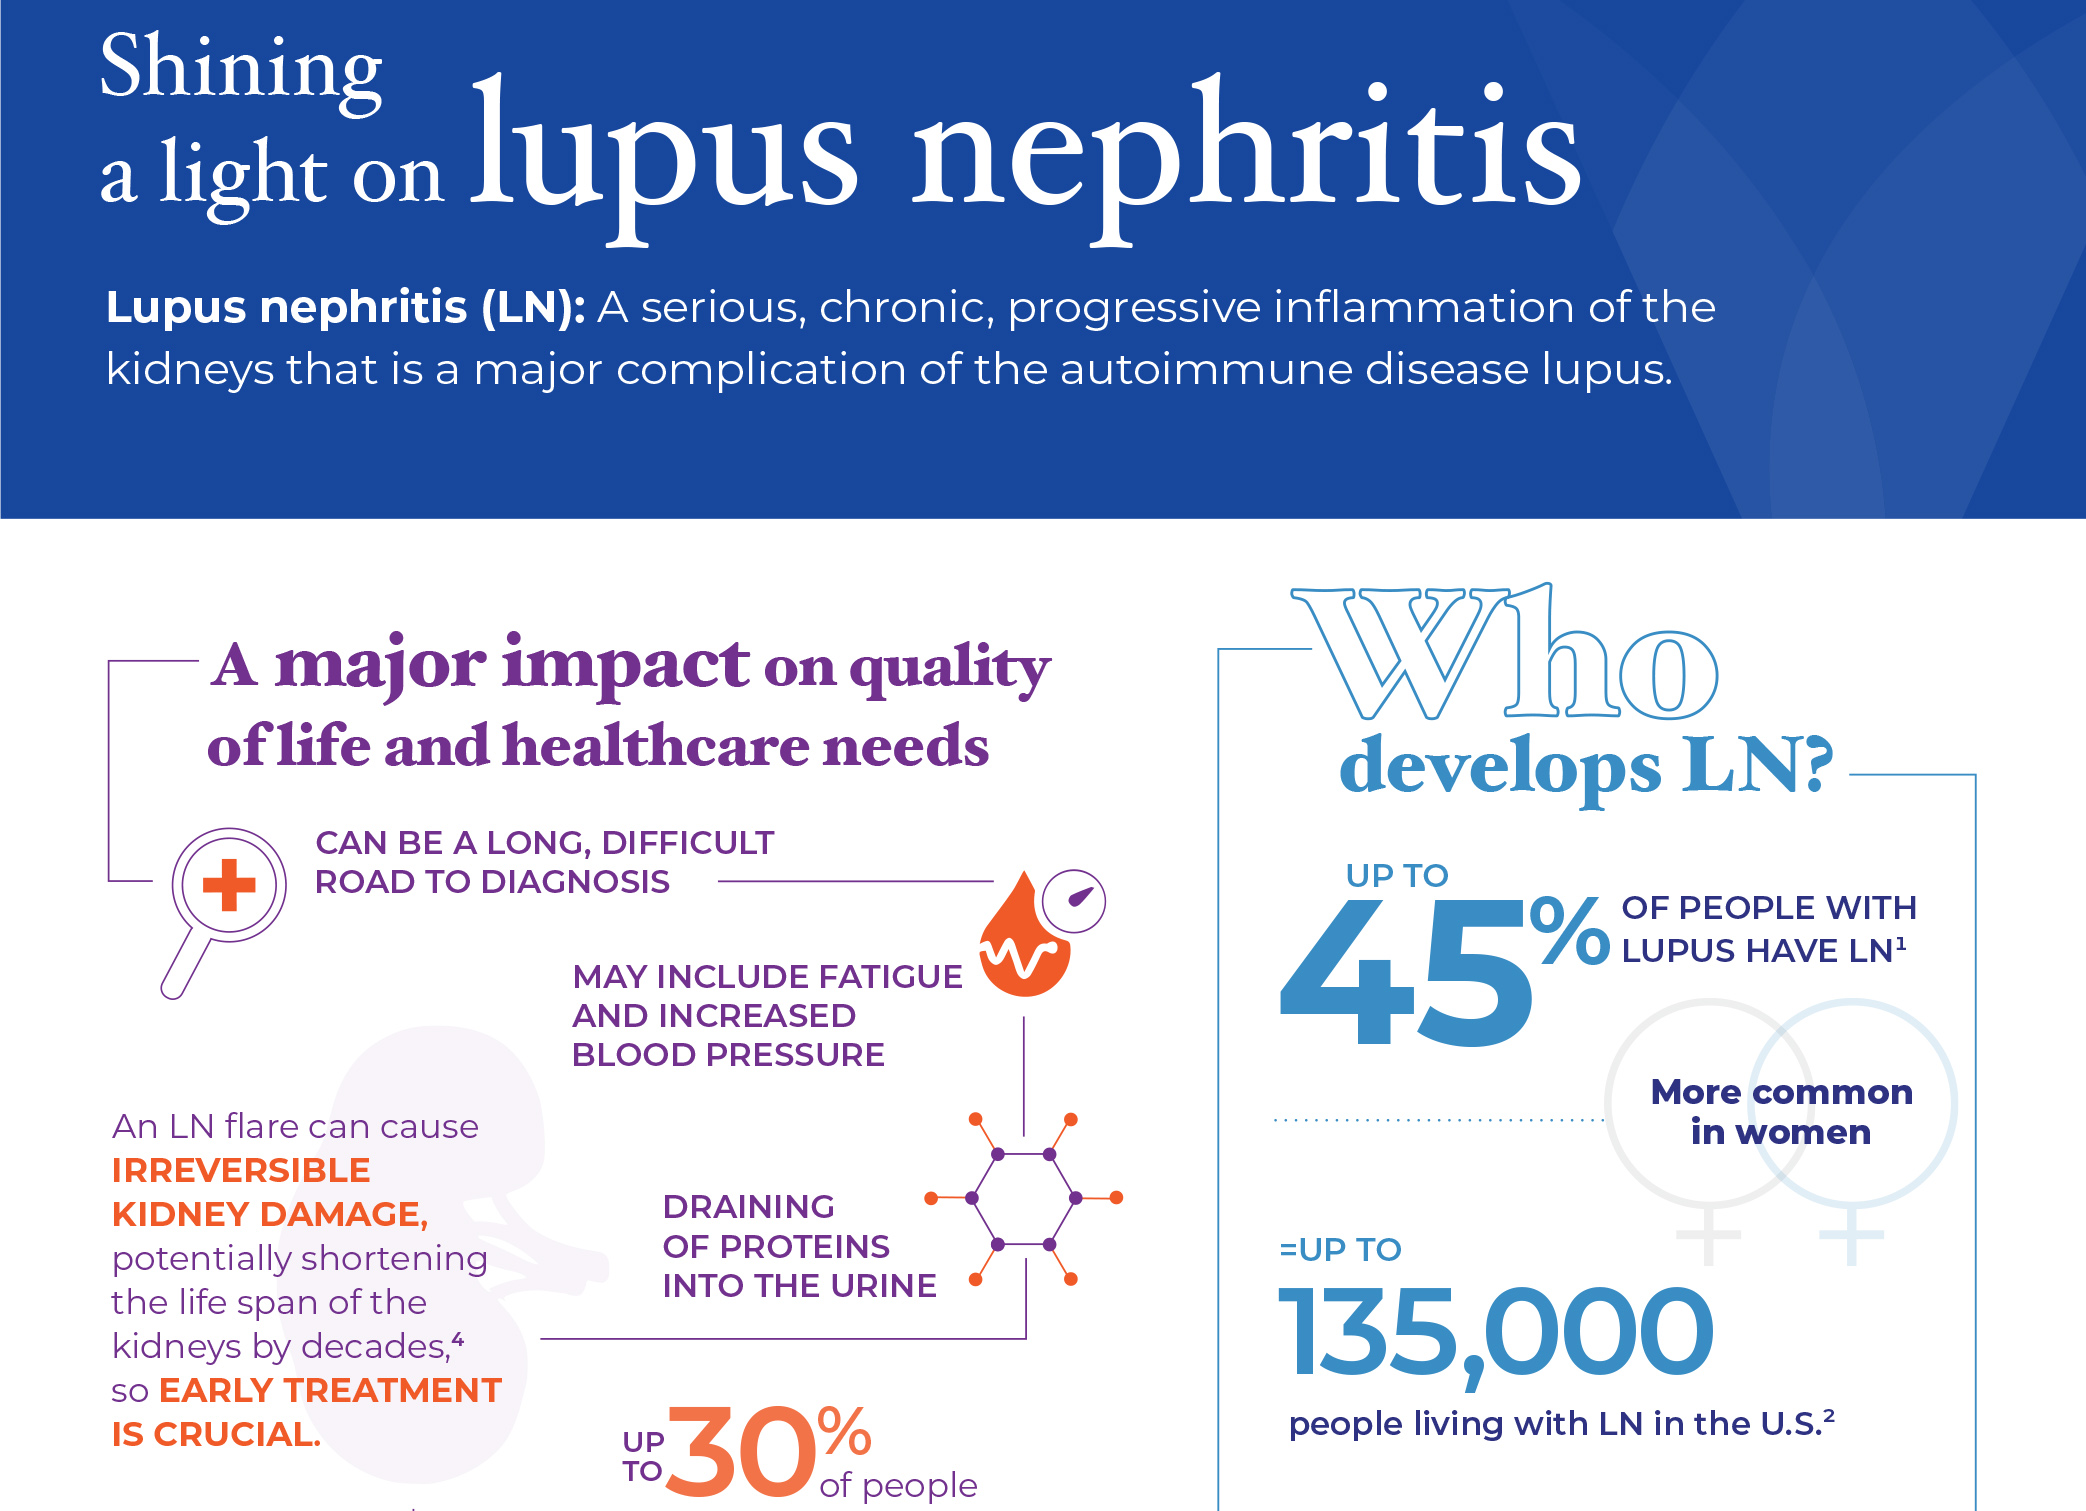 Facts about Lupus Nephritis